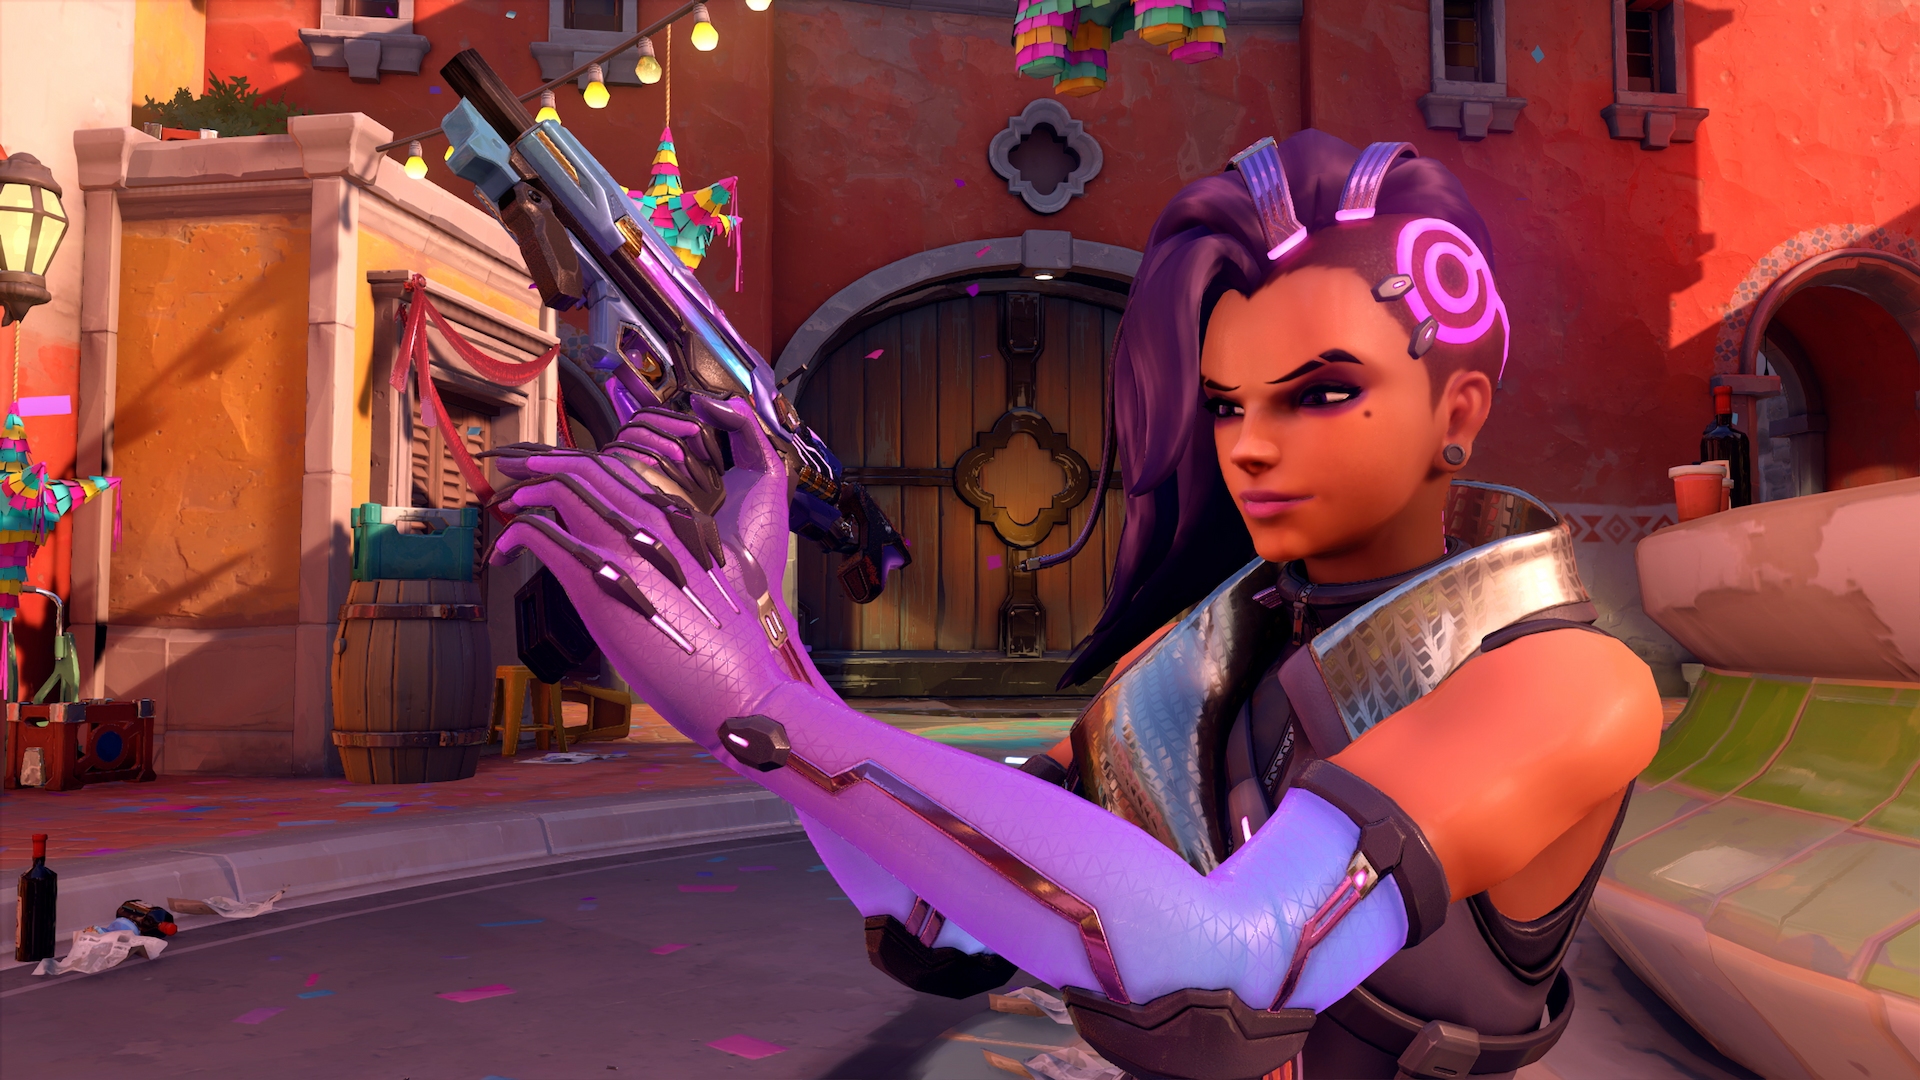 Overwatch 2 streams get interrupted by mysterious code